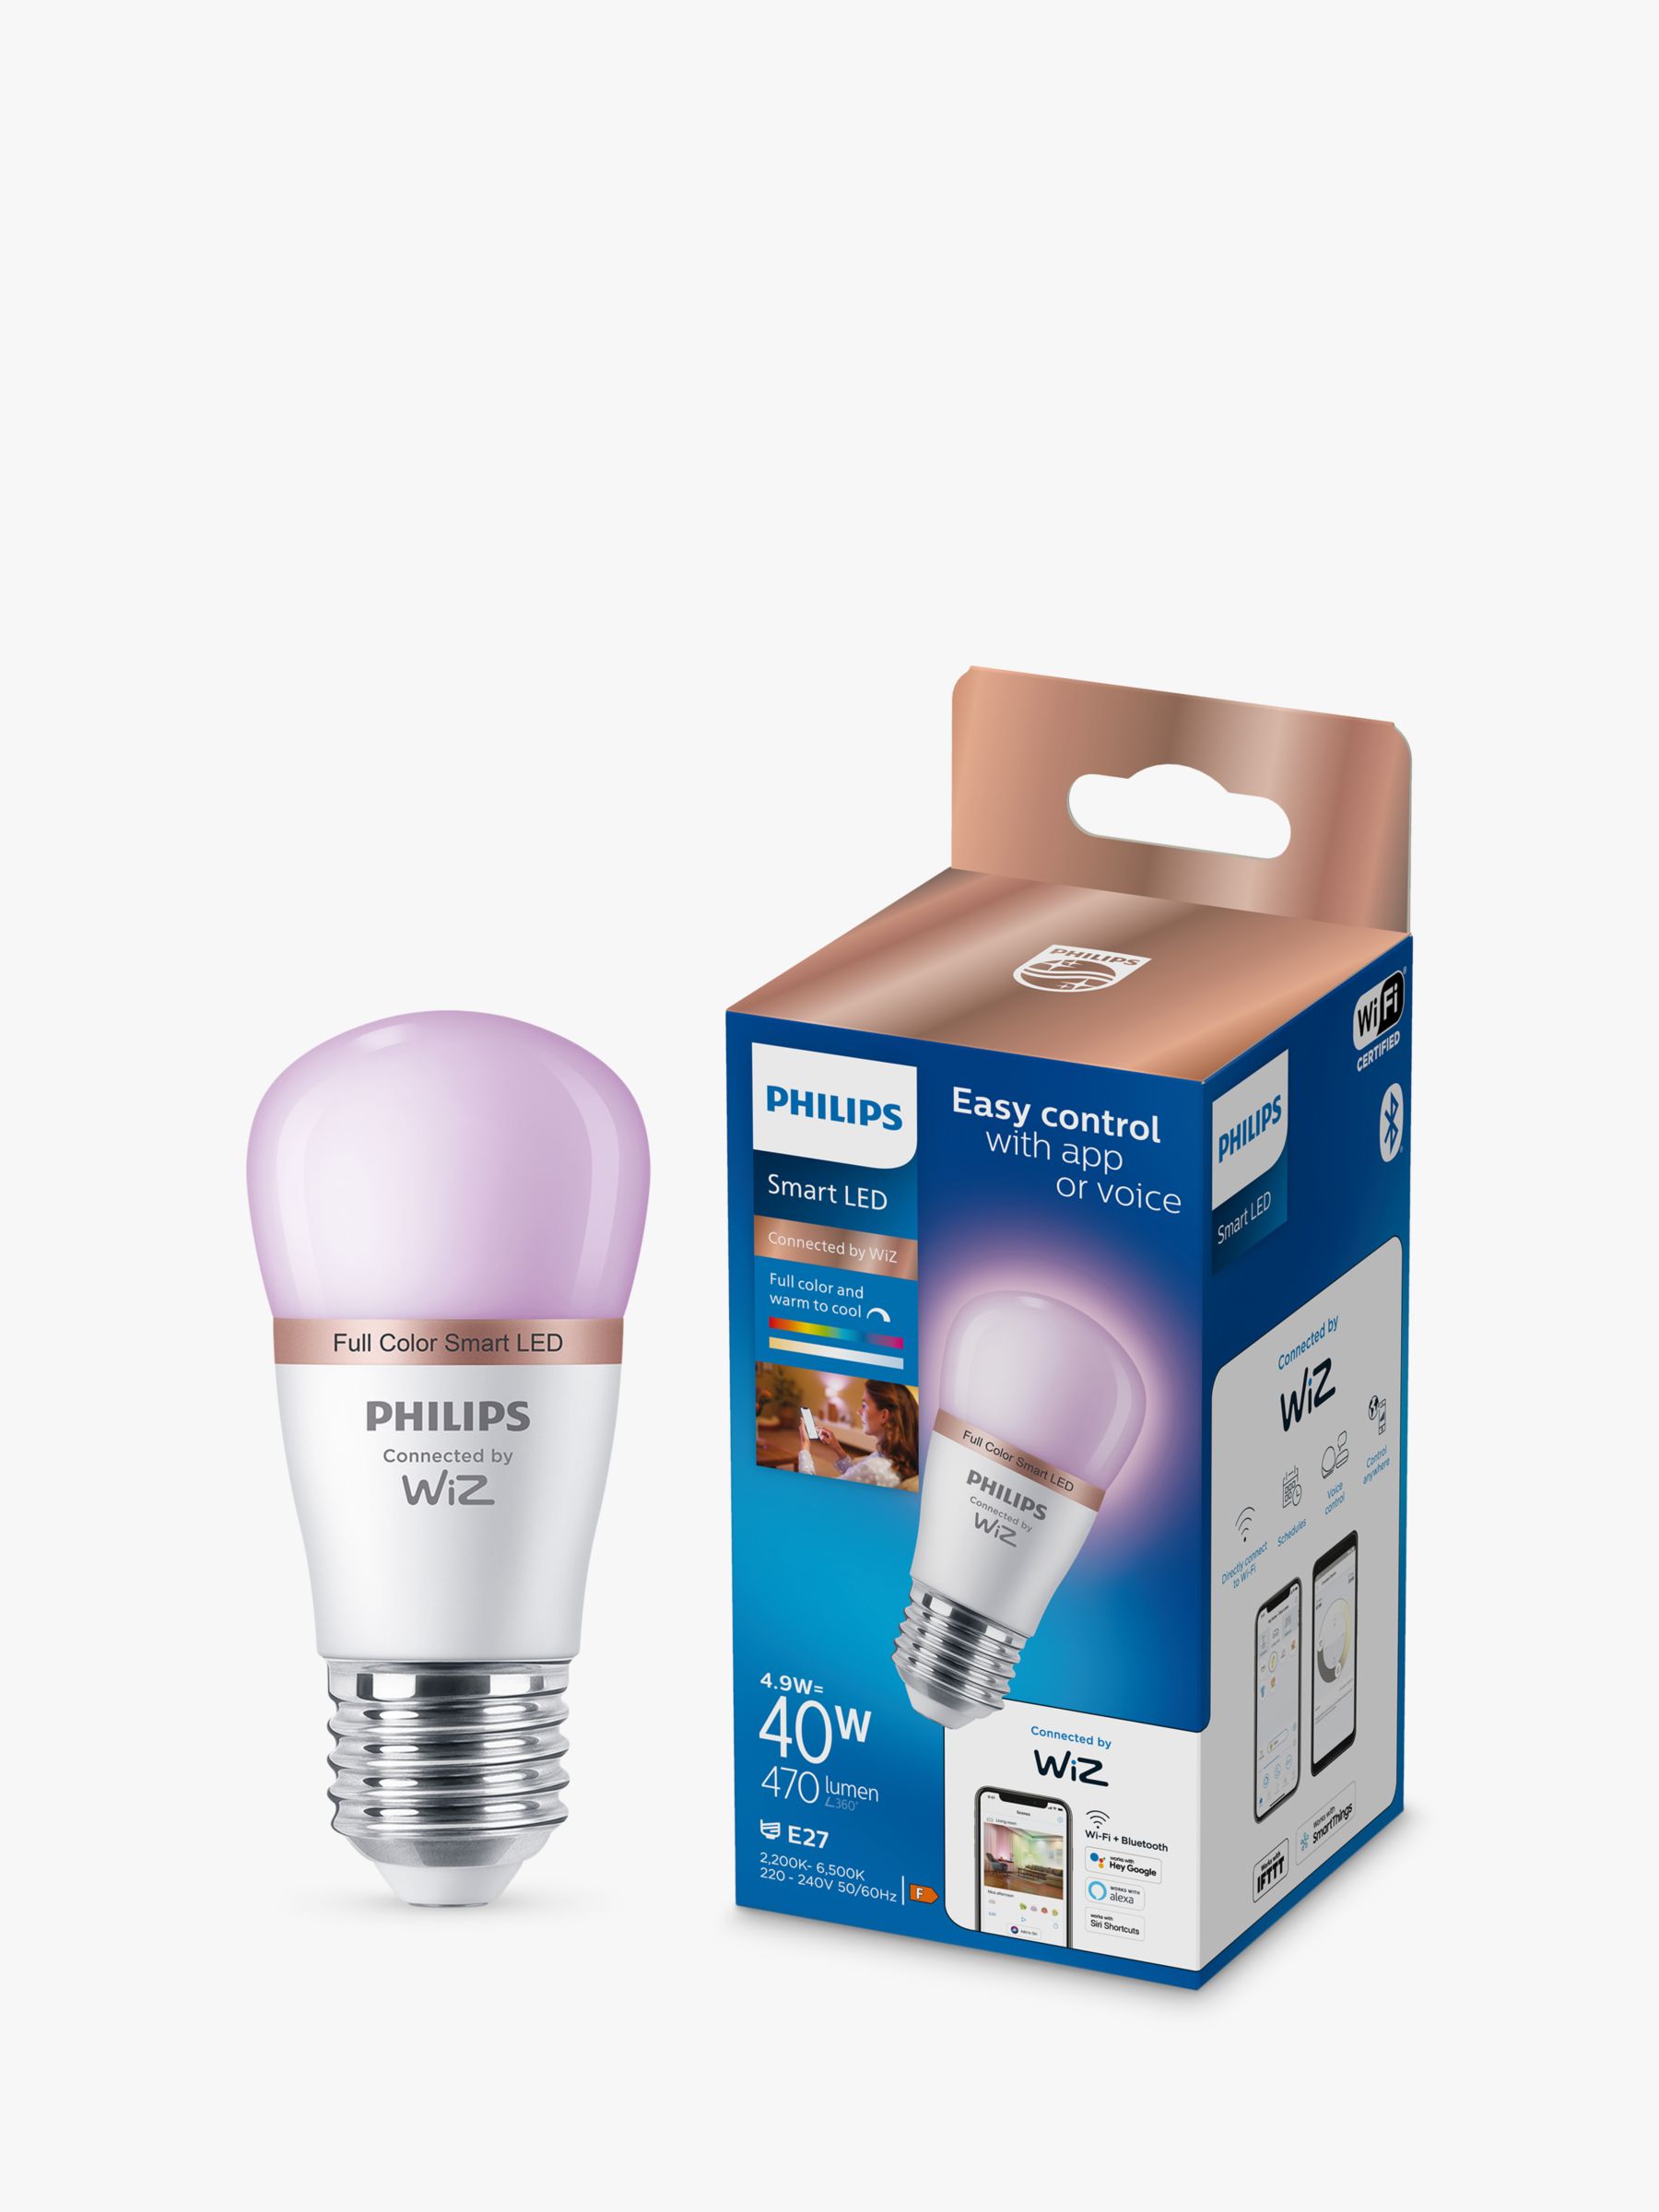 Photo of Philips smart led 4.9w e27 dimmable full colour and warm-to-cool classic bulb with wiz connected and bluetooth white